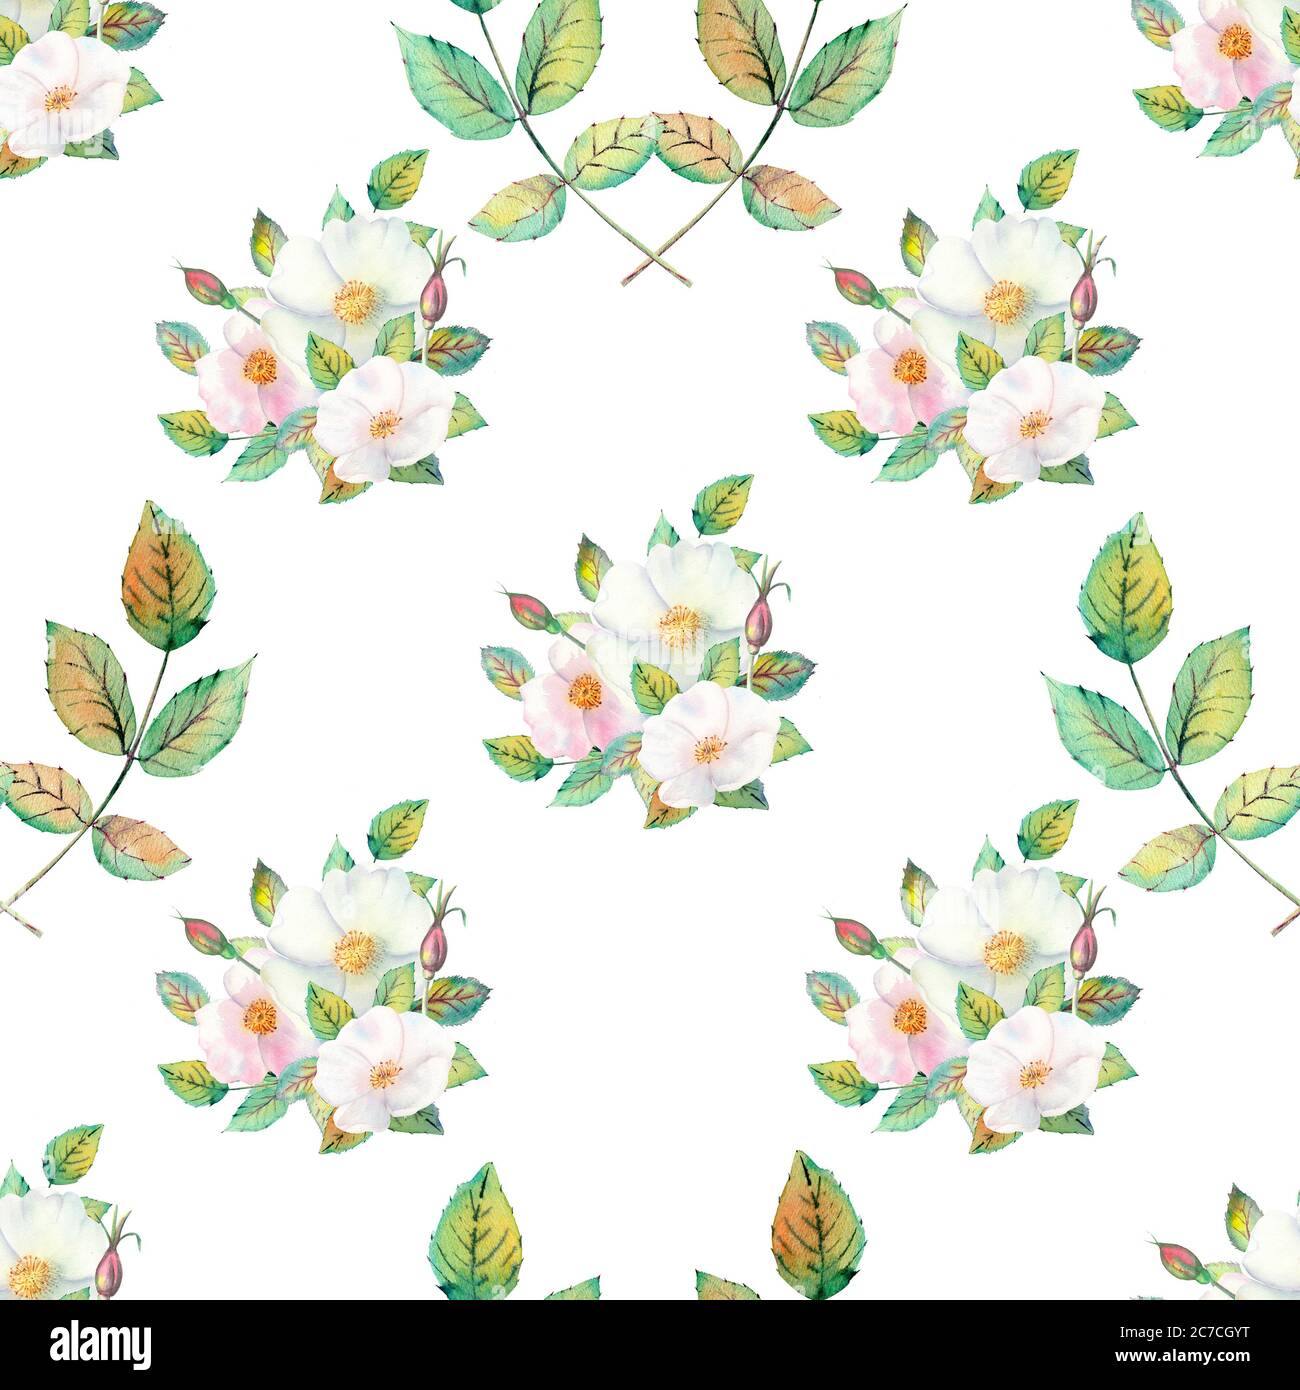 Seamless pattern. Flowers and fruits of rose hips Watercolor. Flower illustrations. Bohemian bouquets of flowers, wreaths, wedding compositions Stock Photo